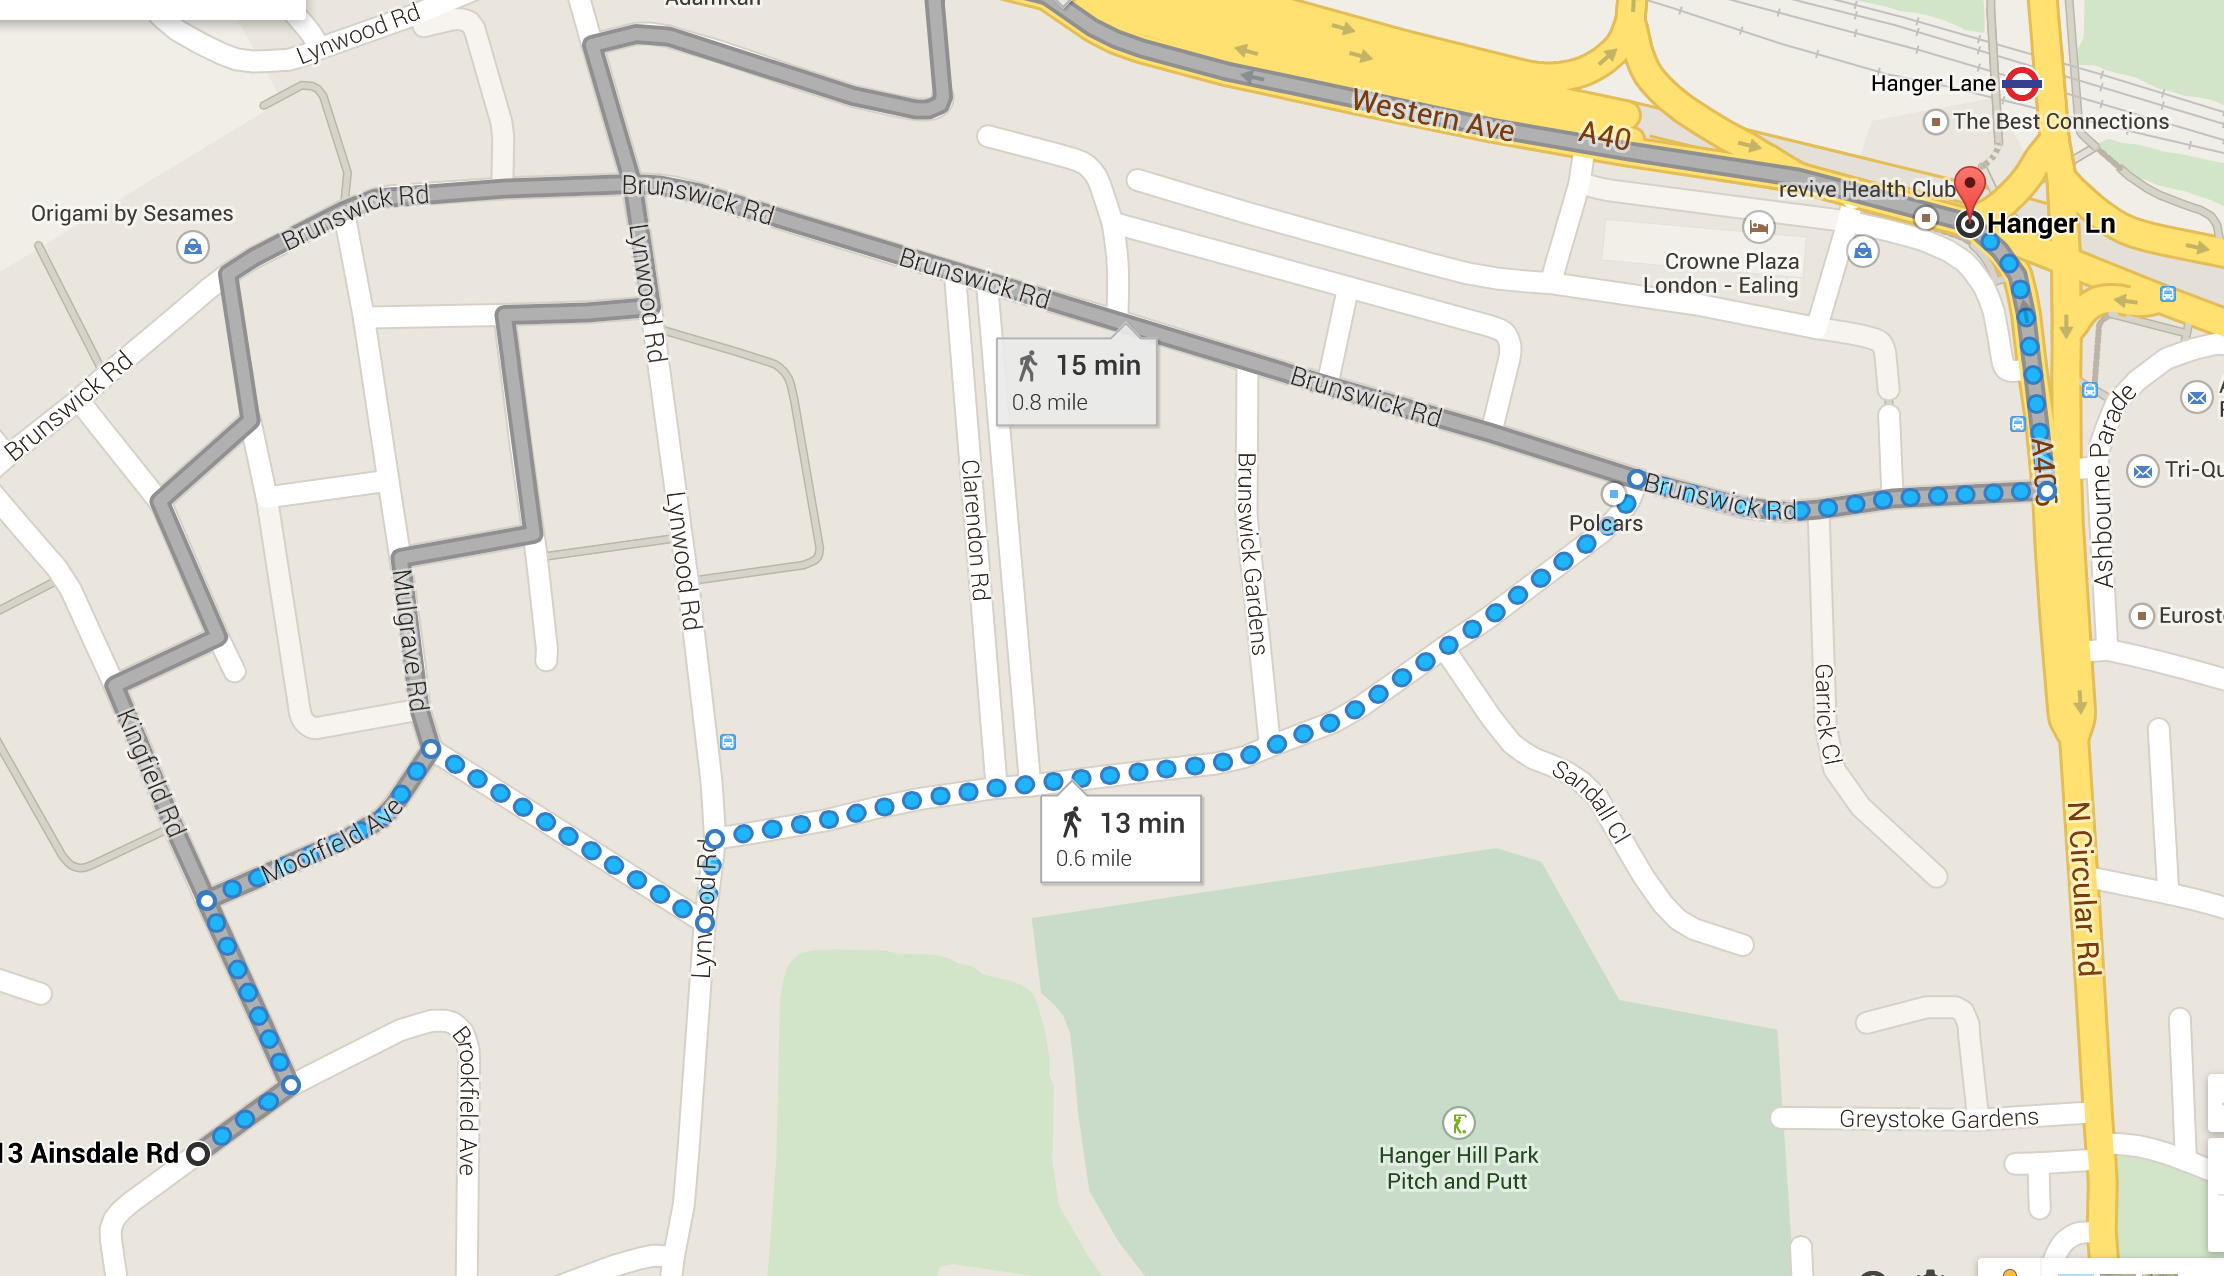 Ainsdale Road walking route